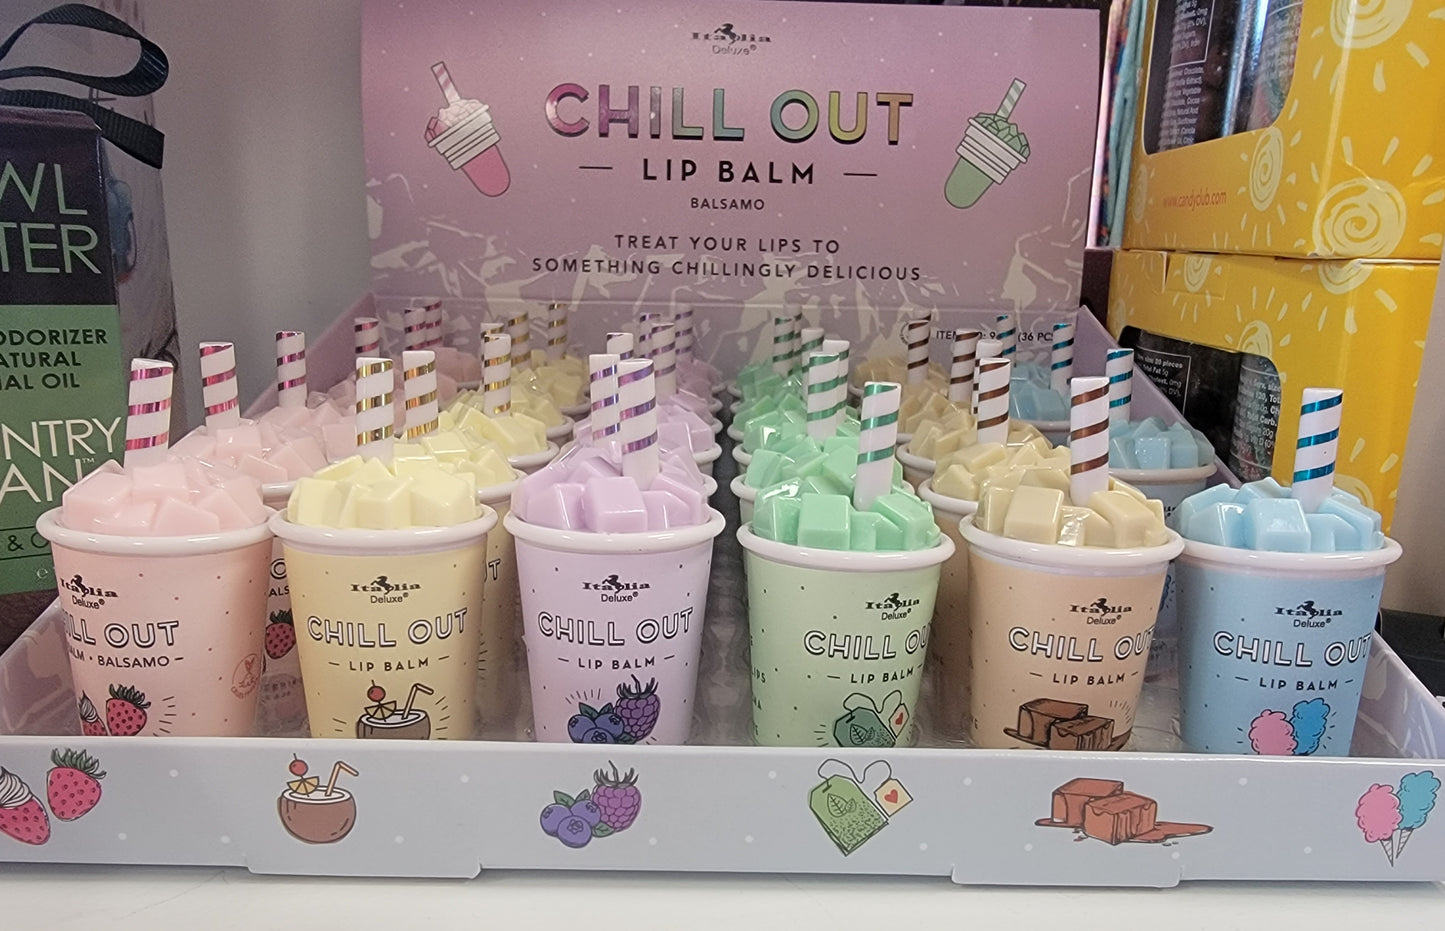 Chill Out Lip Balm